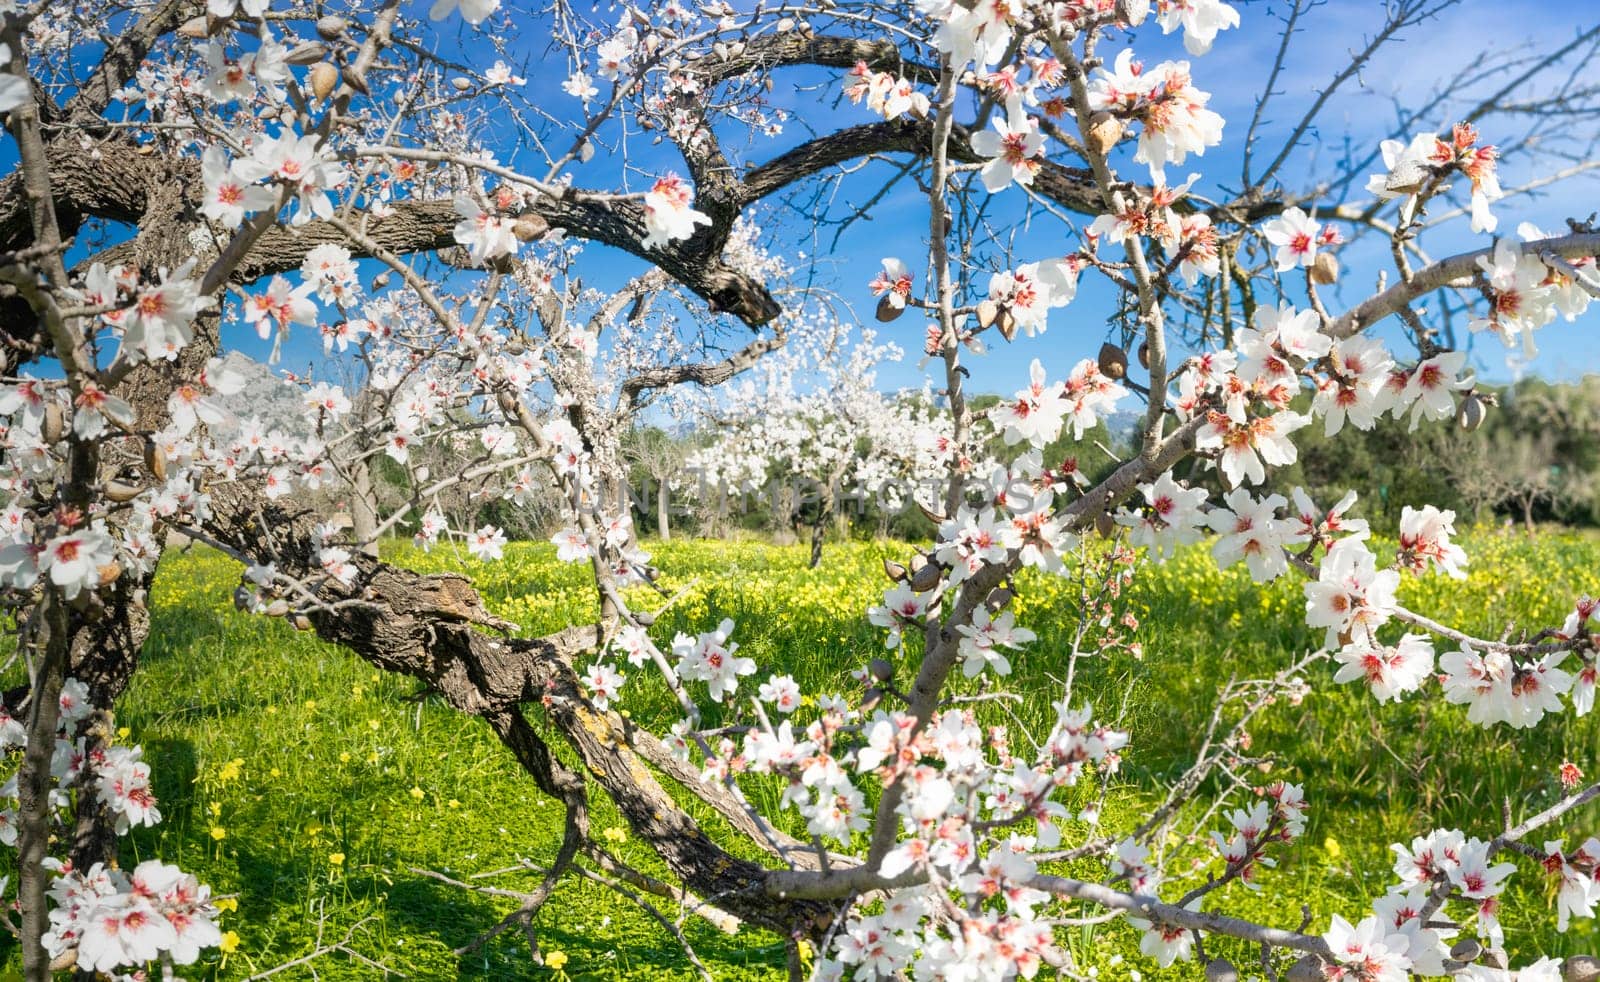 A vibrant orchard comes to life with almond blossoms bursting against a clear sky, while a carpet of wildflowers complements the scene. The gnarled branches tell tales of resilience